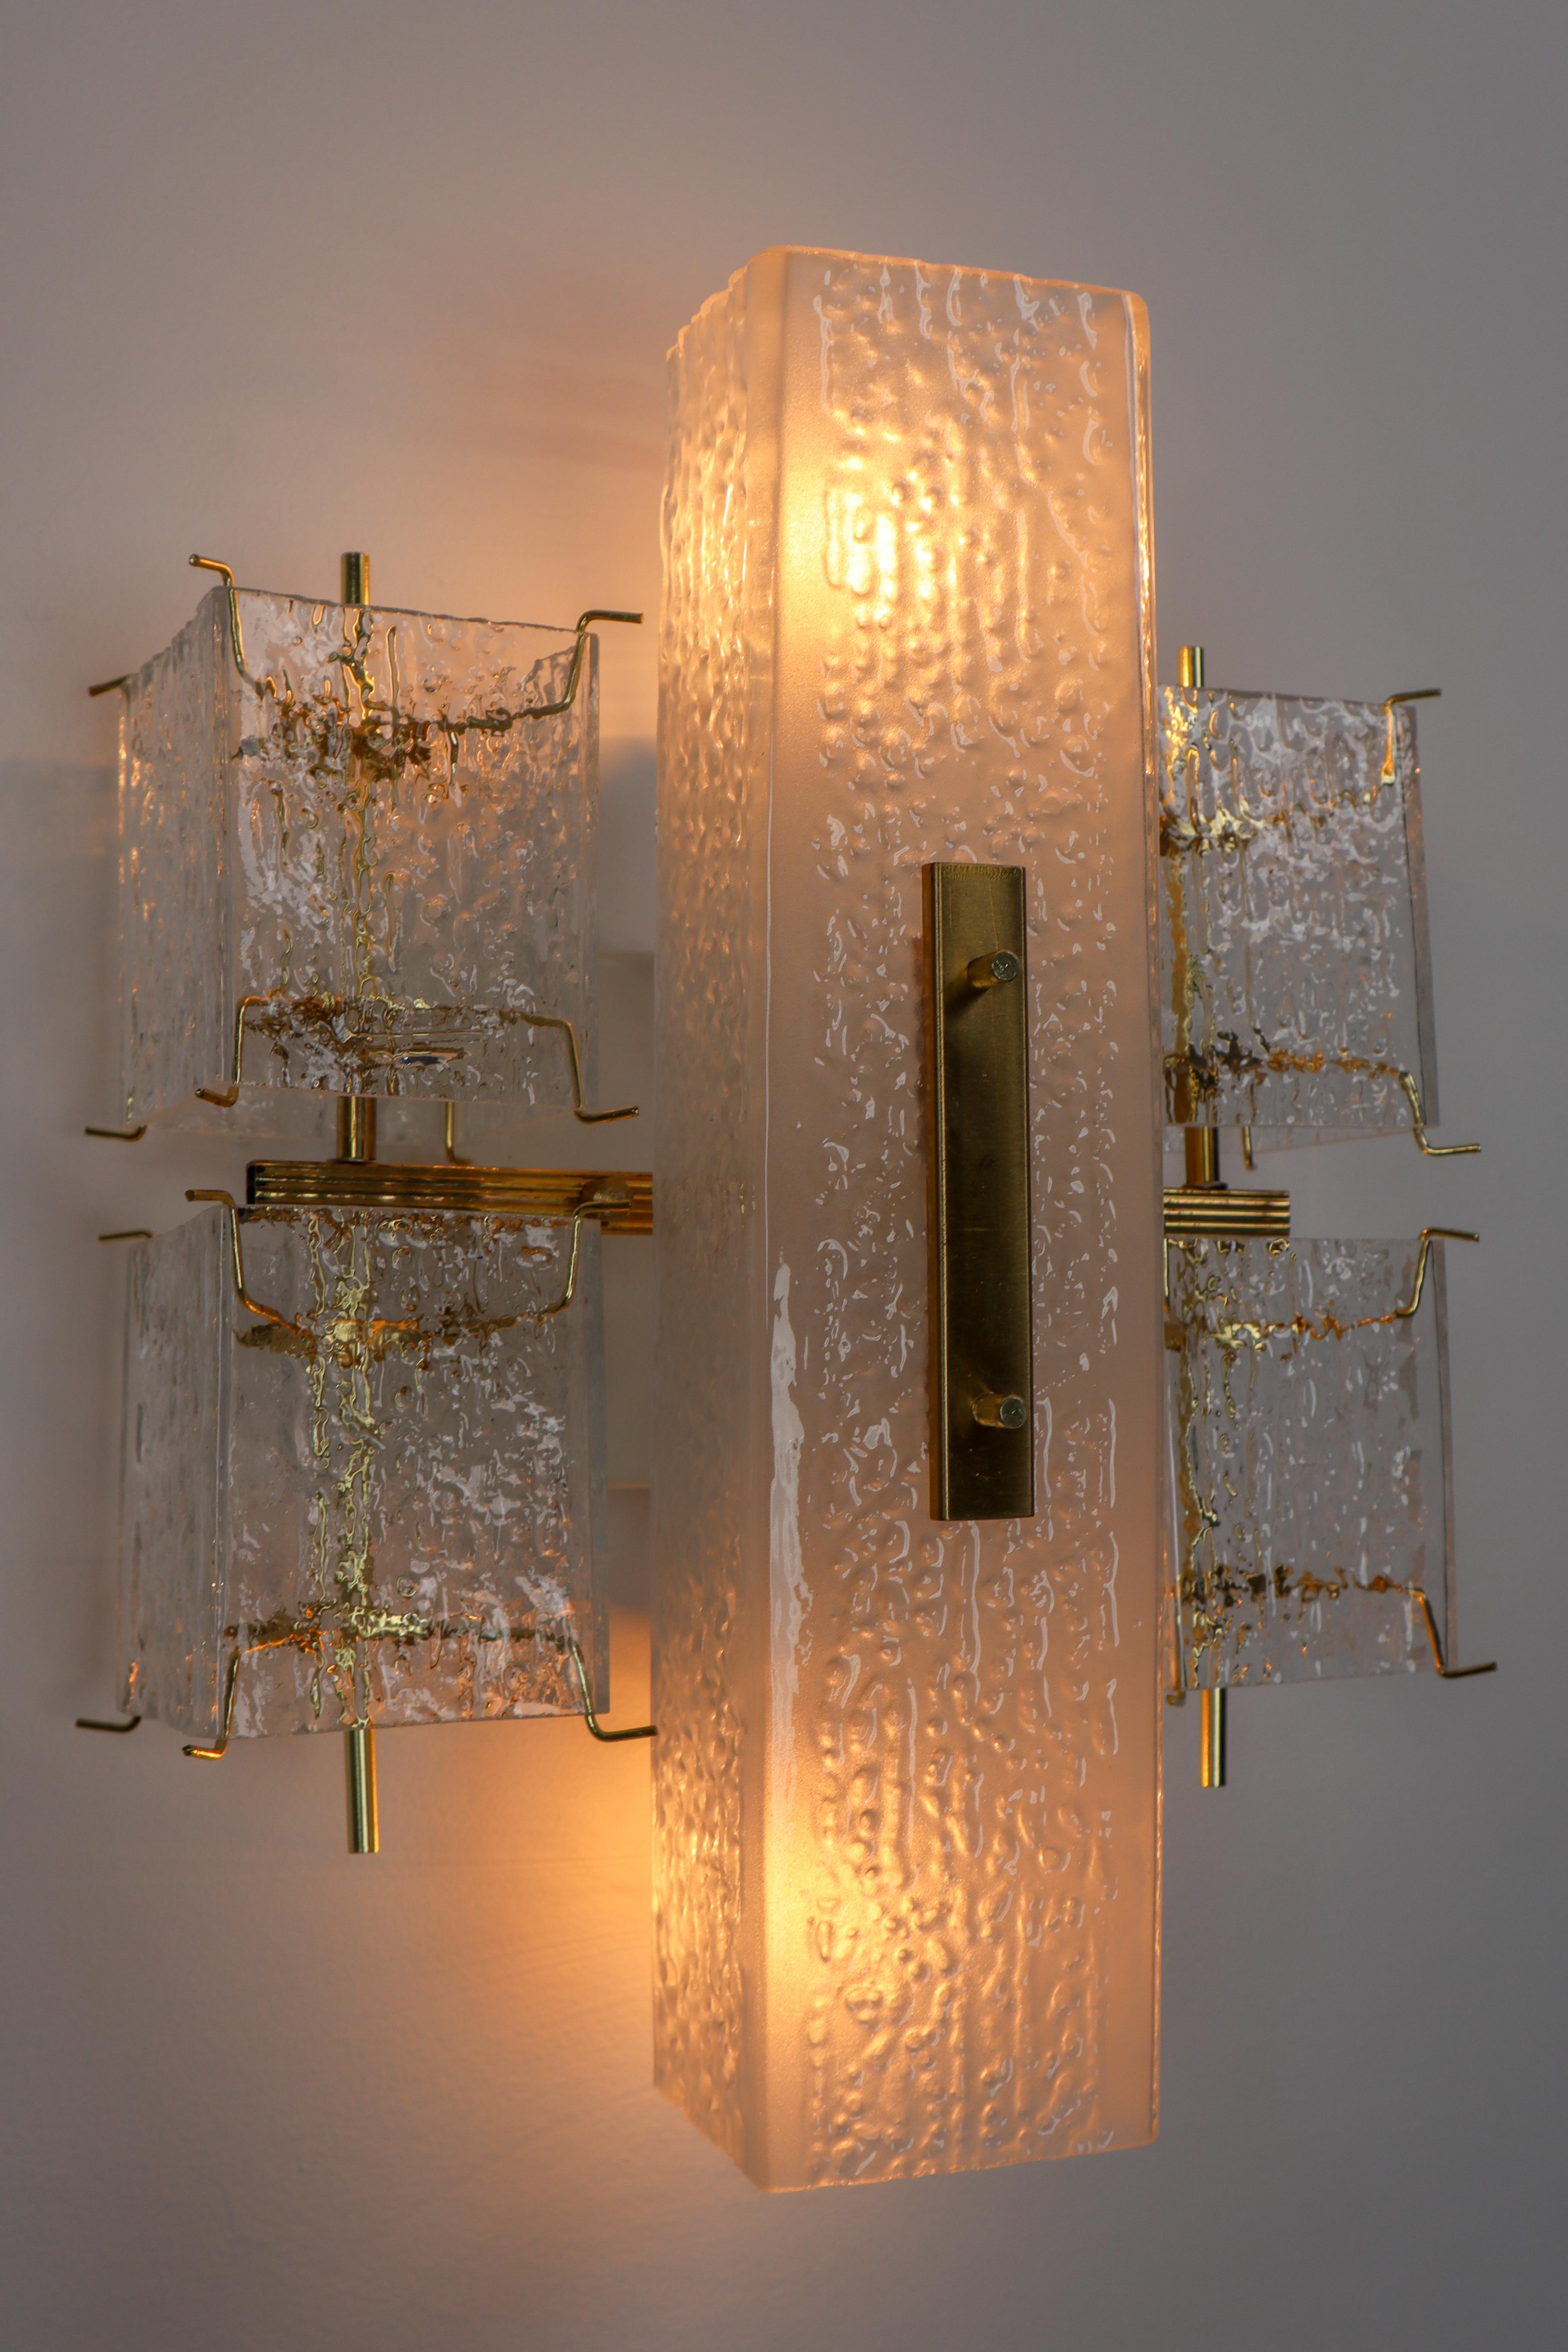 1 of 8 Midcentury Wall Lights with Structured Glass and Brass, Europe, 1970s For Sale 13